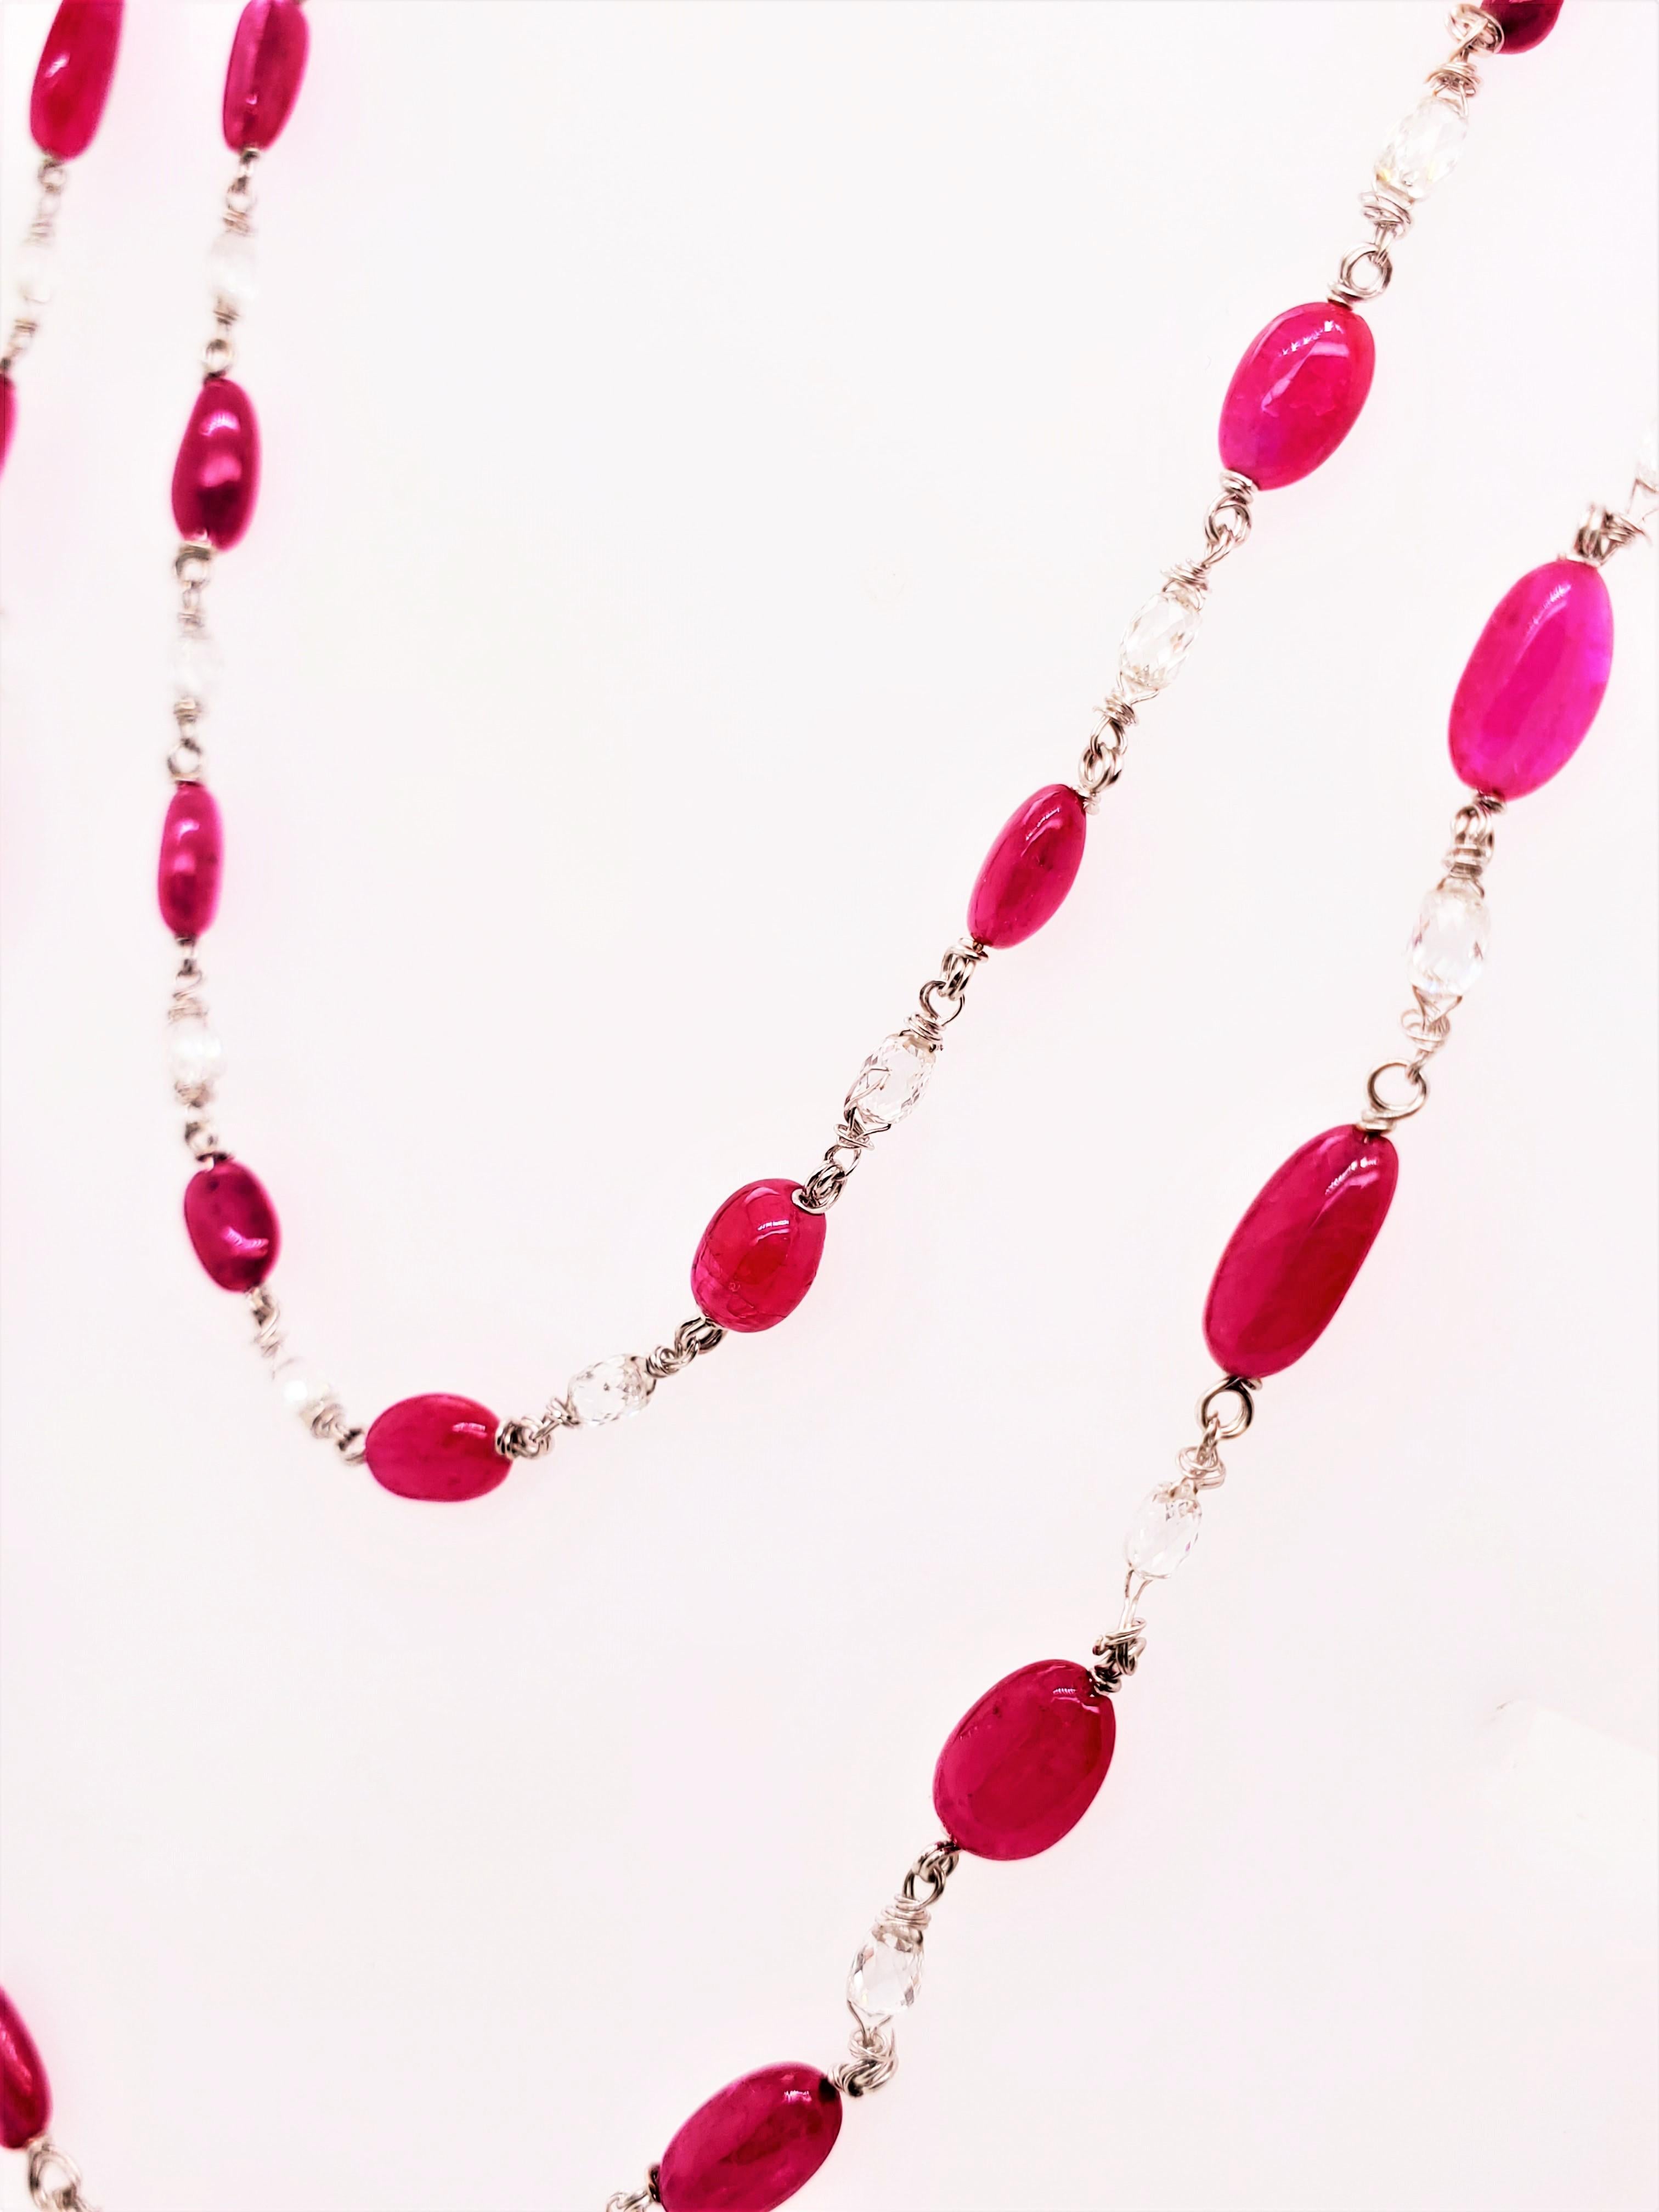 Vivid Red Ruby Beads and Diamond Briolette White Gold Necklace :

A scintillating beaded necklace, it features 37 vivid red rubies weighing 41 carat as well as 37 white diamond briolettes weighing 5.14 carat. The rubies are of vivid red colour, with